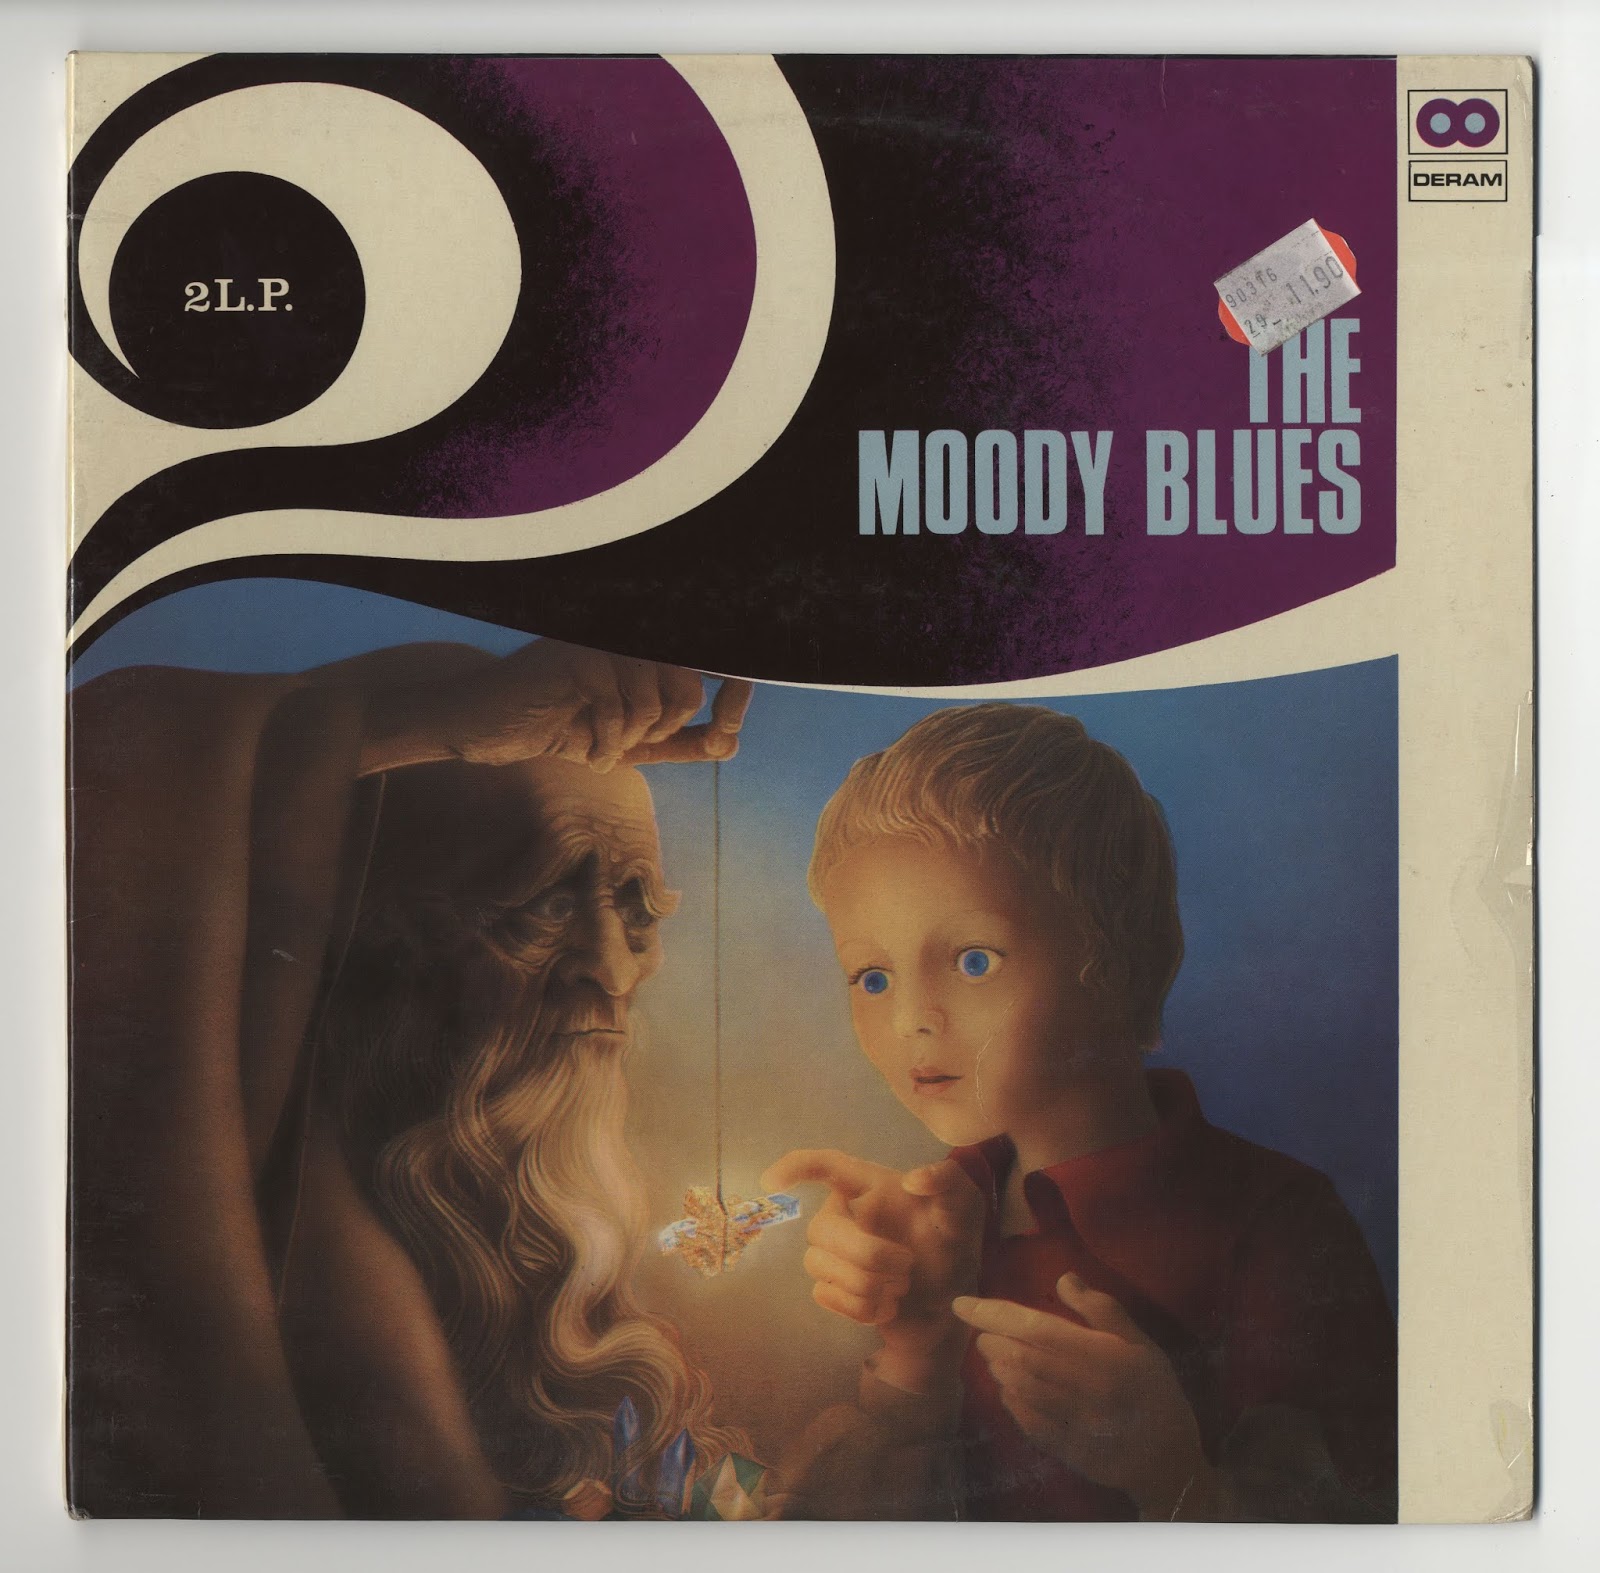 The Moody Blues 1978 The Great Moody Blues